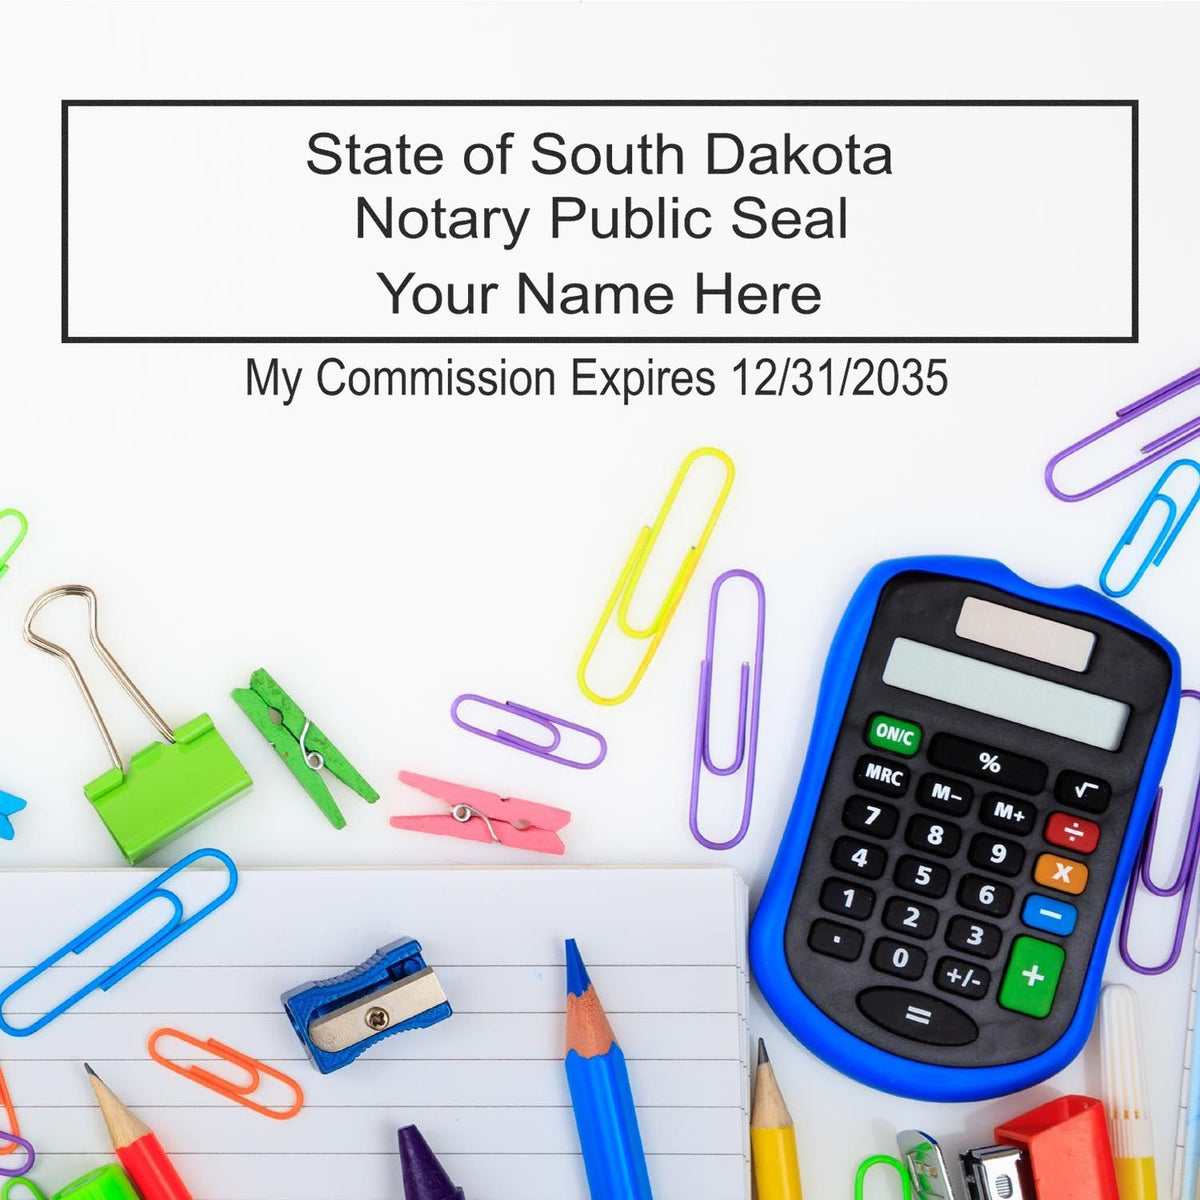 Another Example of a stamped impression of the Self-Inking Rectangular South Dakota Notary Stamp on a piece of office paper.